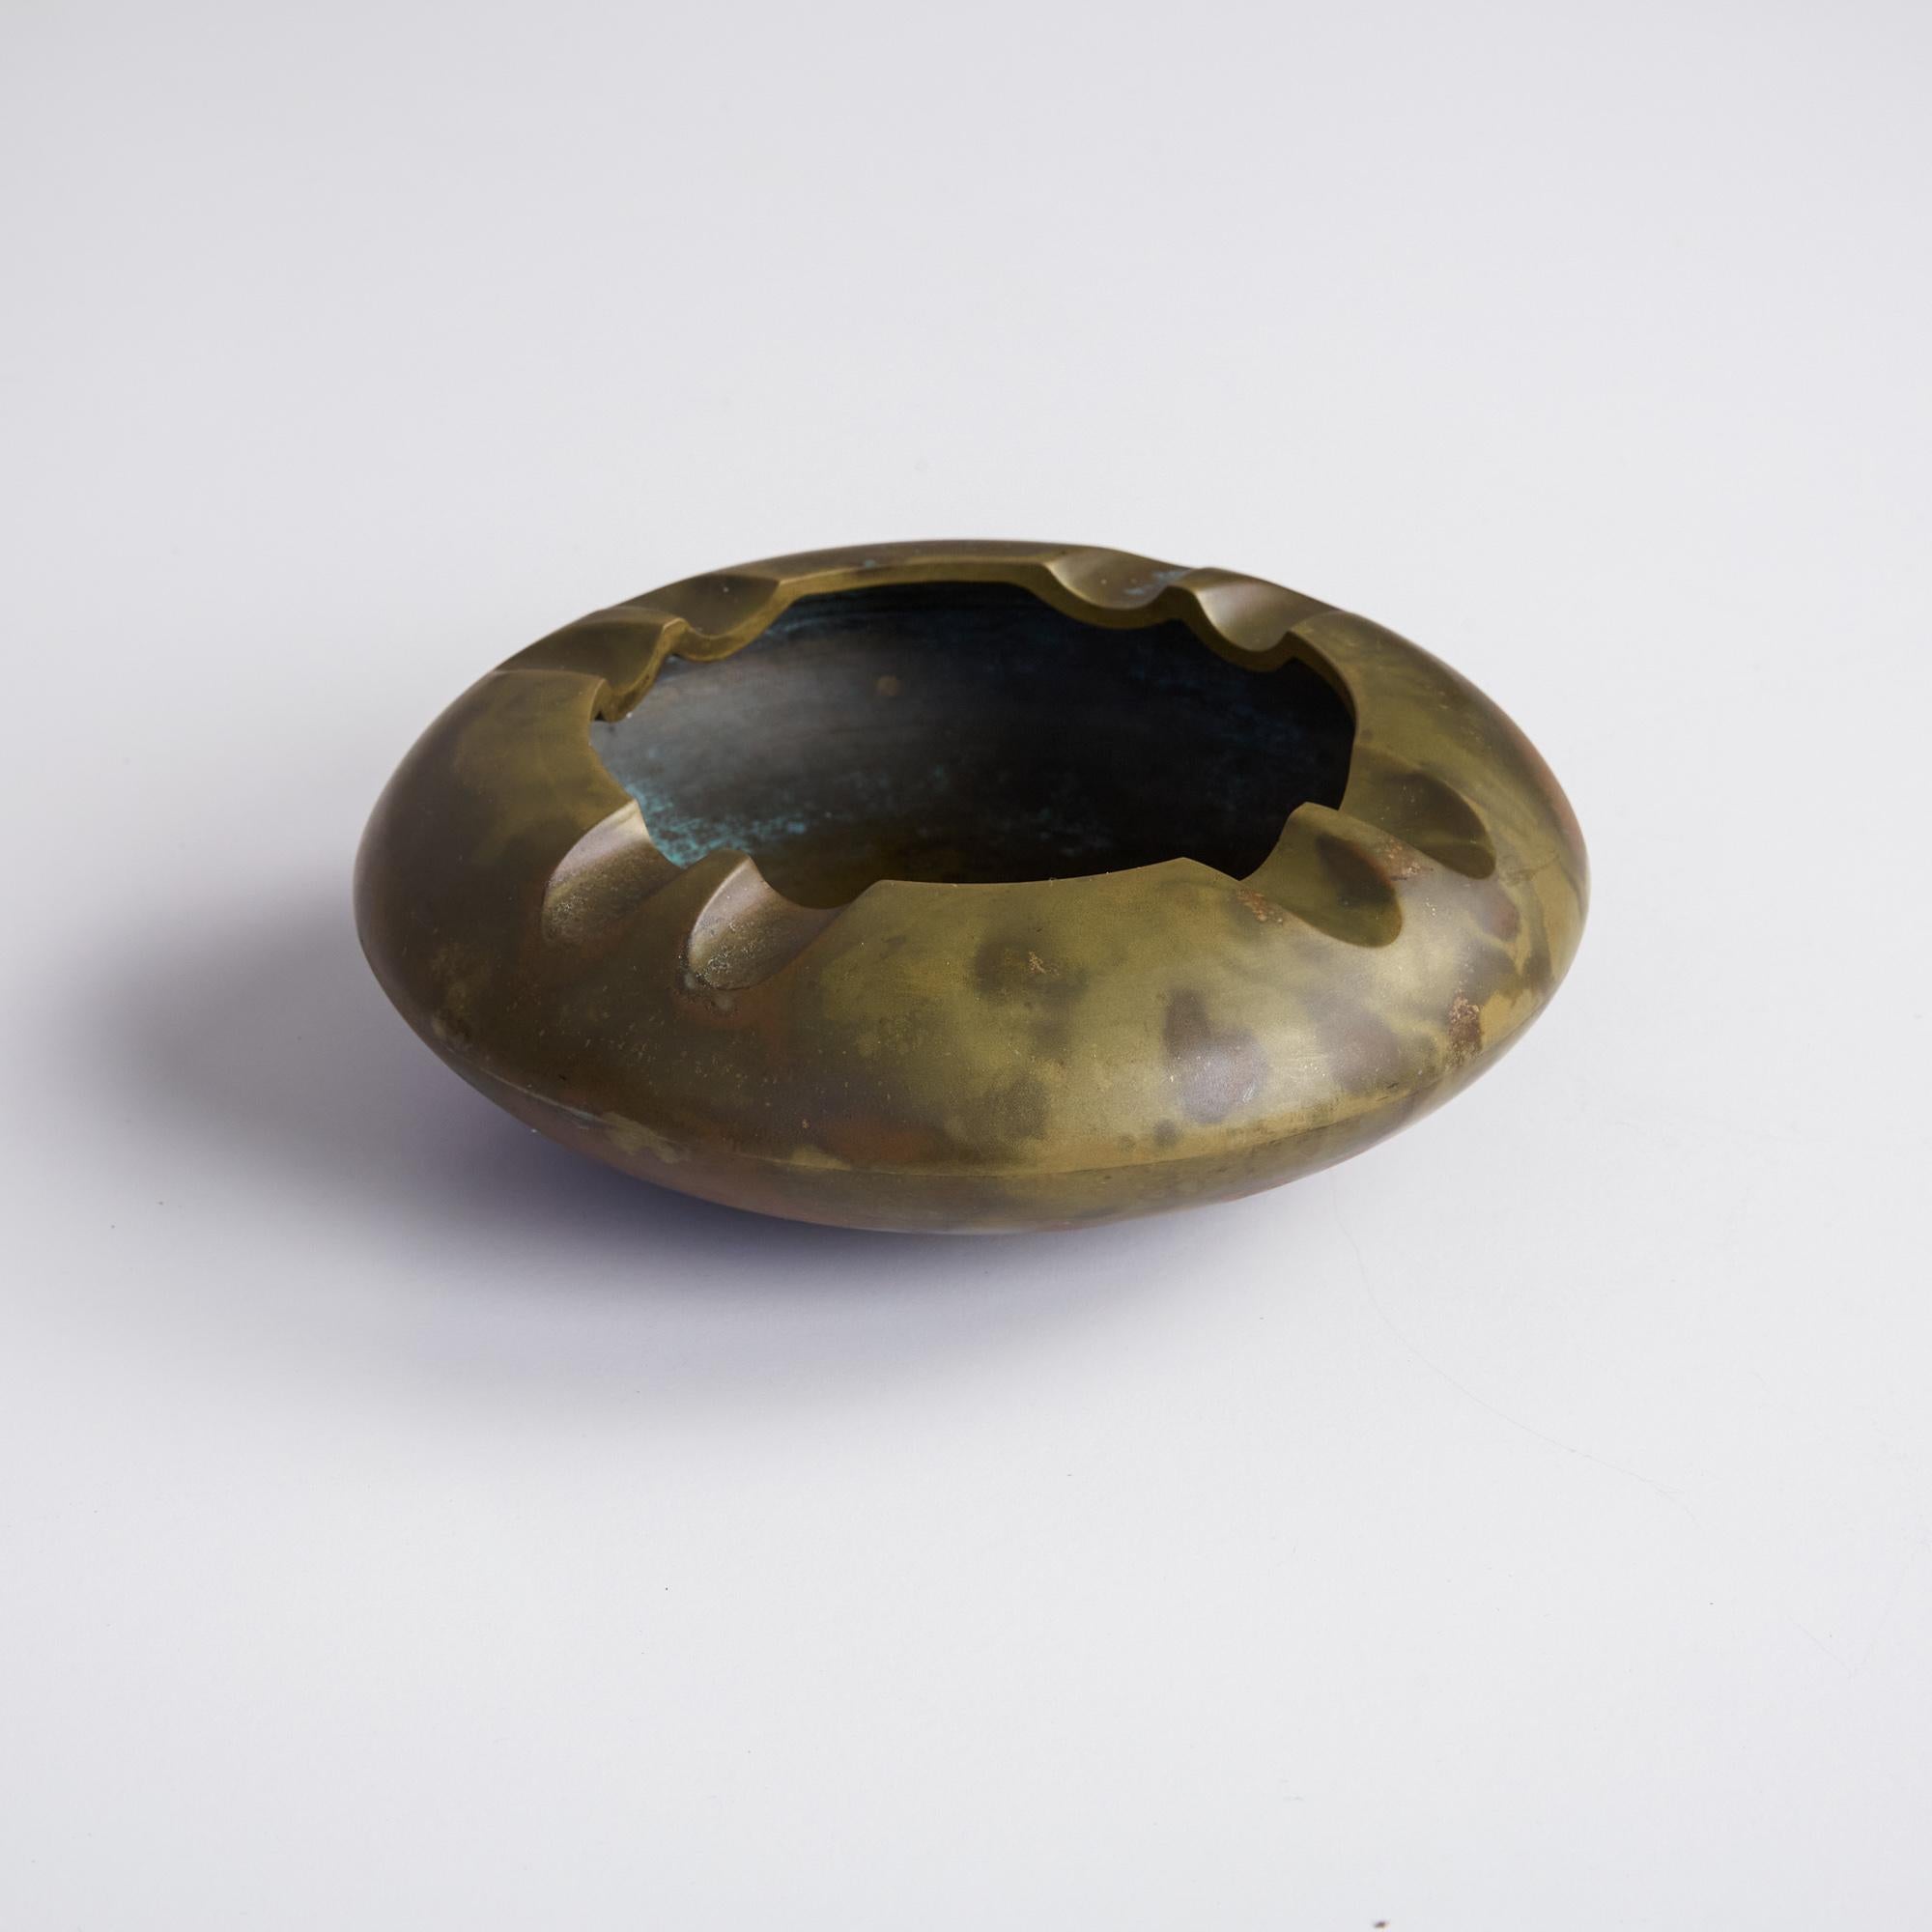 Our sales director here at DEN, Michael Alpert, has never smoked anything in his life. But he has concluded that this is the perfect ashtray. The patina on the bronze with slight hints of verdigris are paired well with the ¼” thickness of the bowl